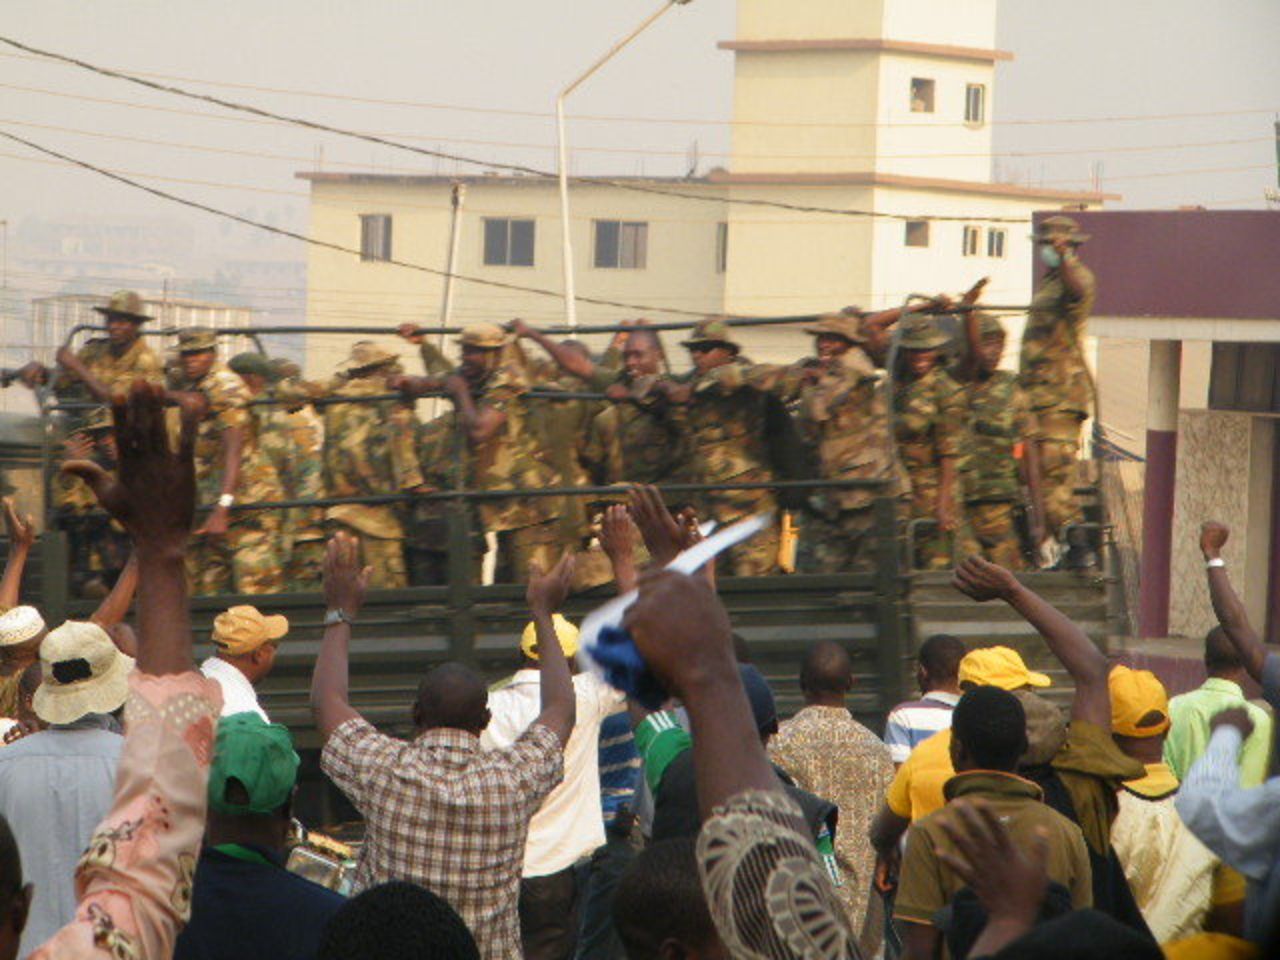 This picture, taken by iReporter Medaiyese Olorunjuwon shows the armed forces monitoring protesters in the city of Ilorin, Kwara State capital. Olorunjuwon said: "The protesters were cheering the armed forces... All in all it was peaceful."